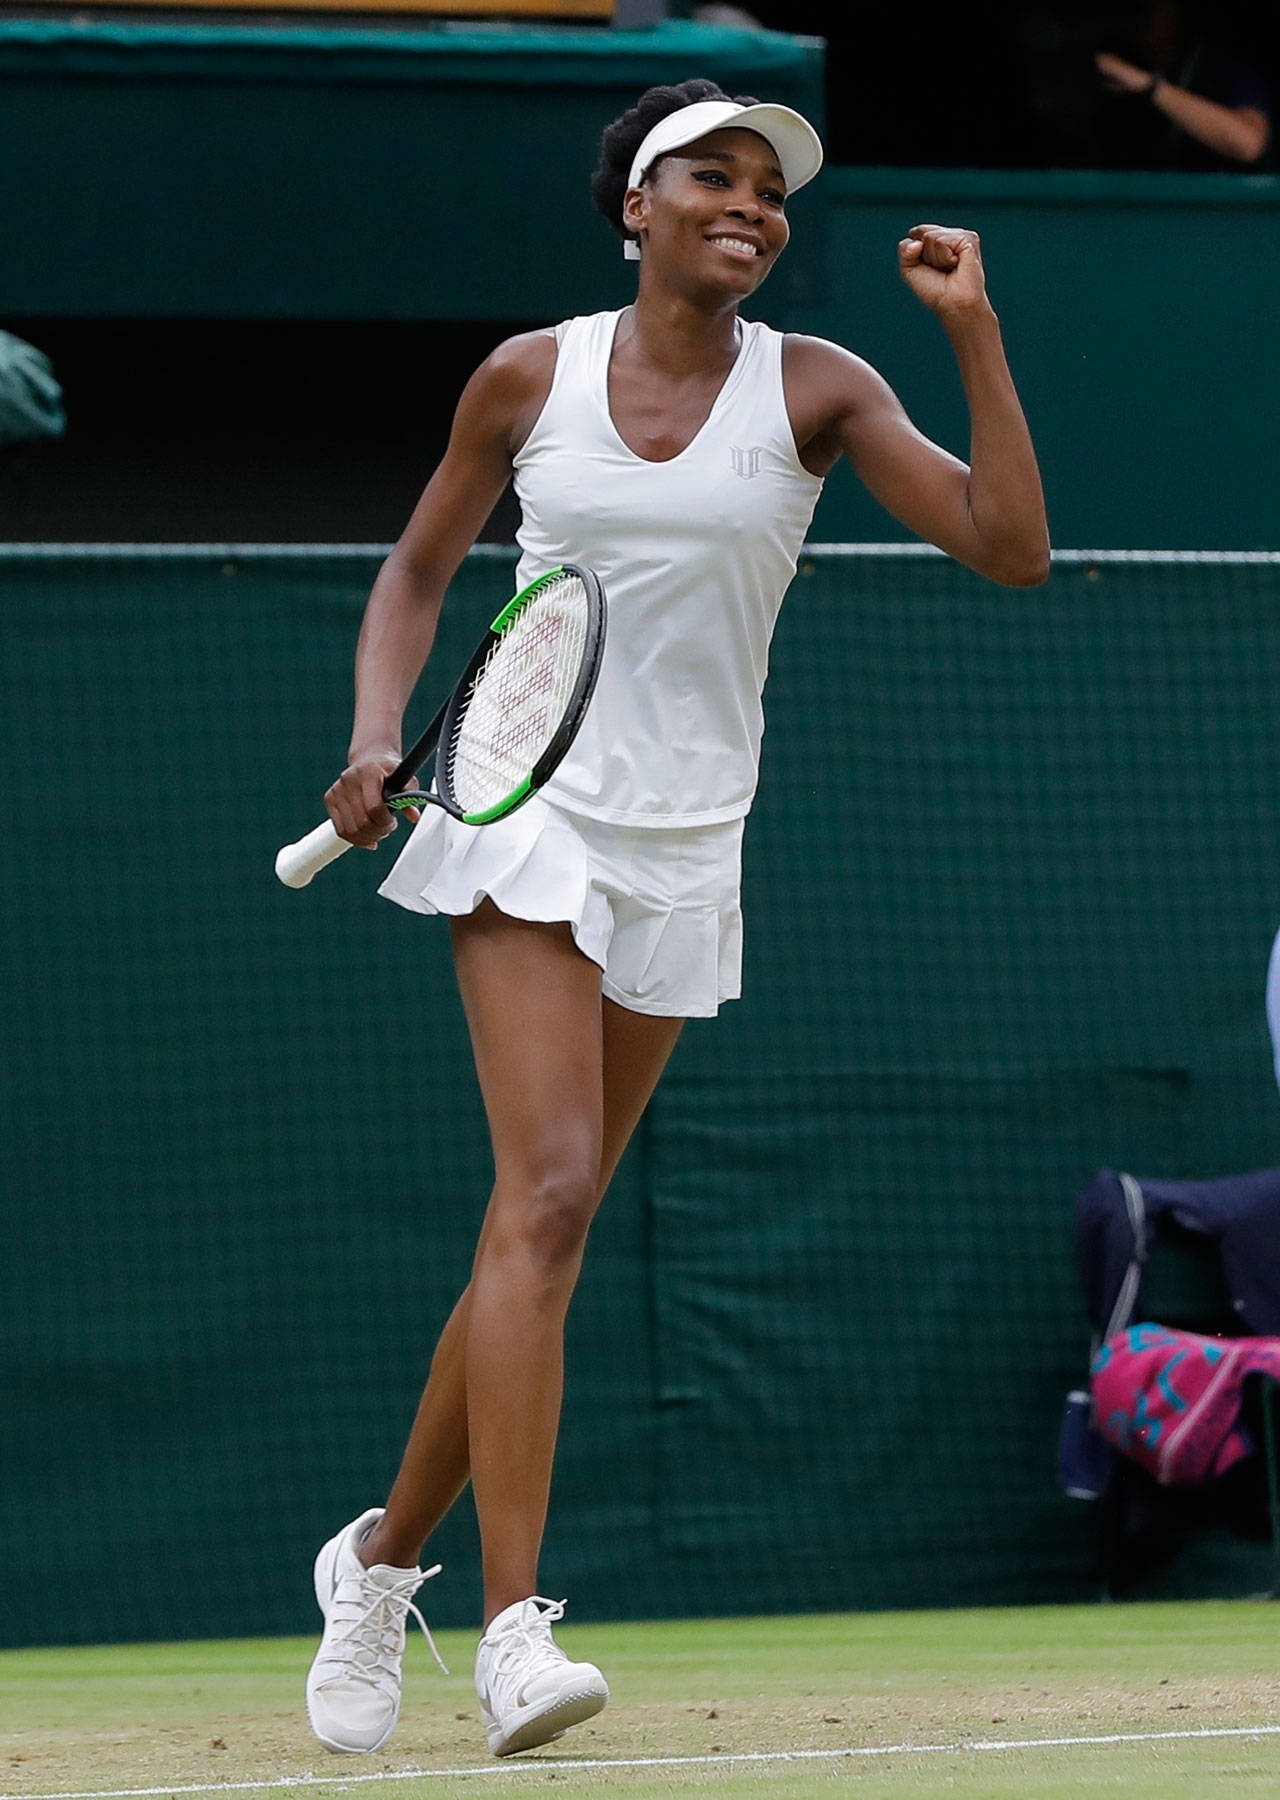 Venus Williams of the United States celebrates after beating Latvia’s Jelena Ostapenko in a women’s singles match Tuesday at the Wimbledon Tennis Championships in London. (AP Photo/Alastair Grant)